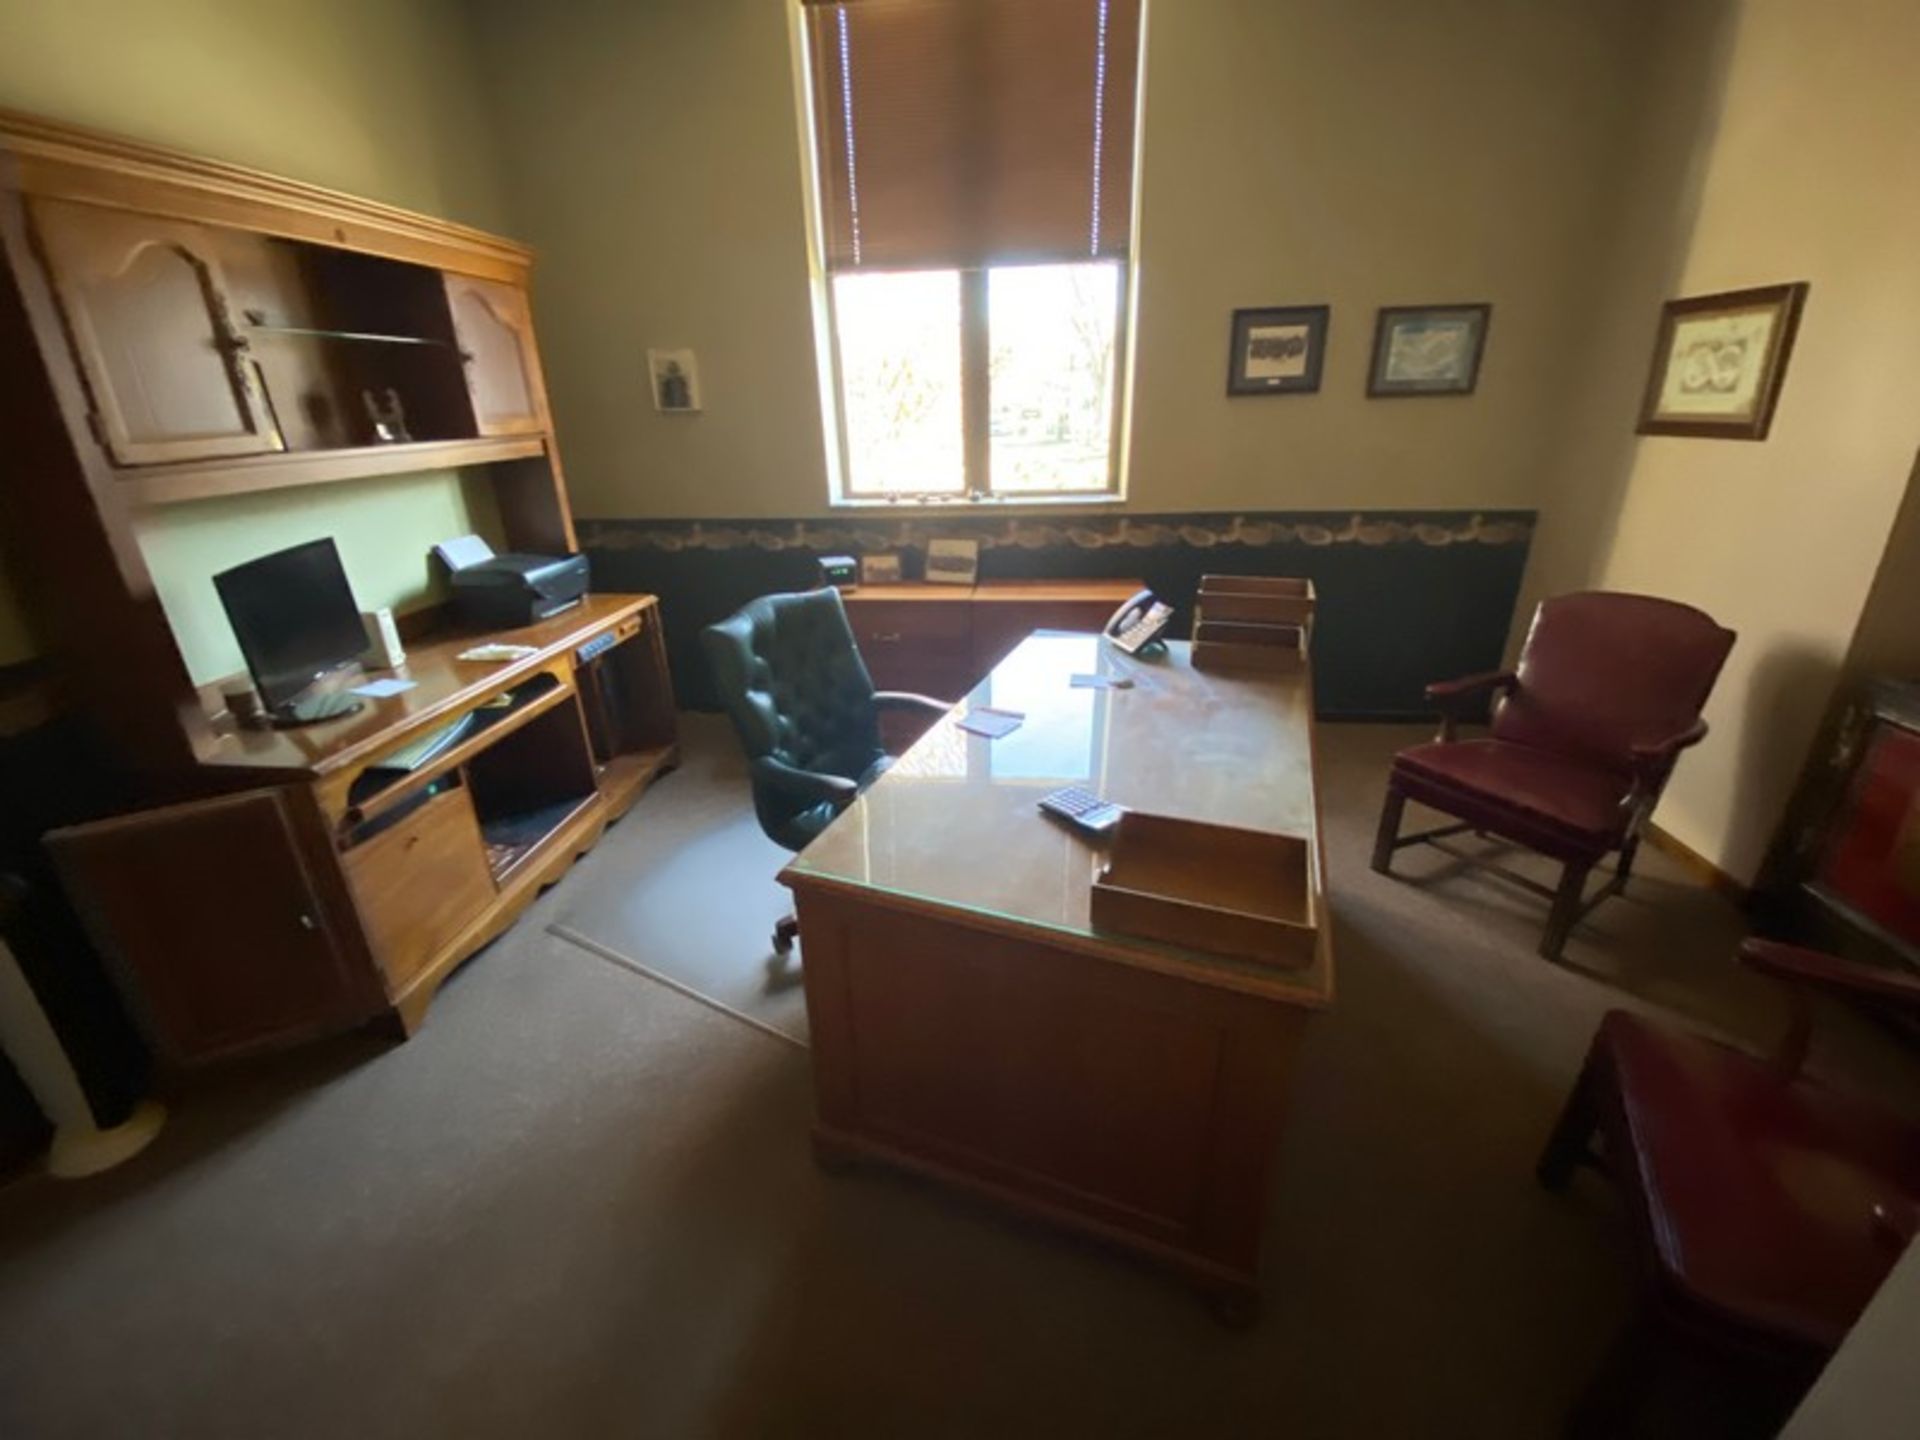 CONTENTS OF EXECUTIVE OFFICE, INCLUDES FURNITURE & CHAIRS (LOCATED IN CALLERY, PA)